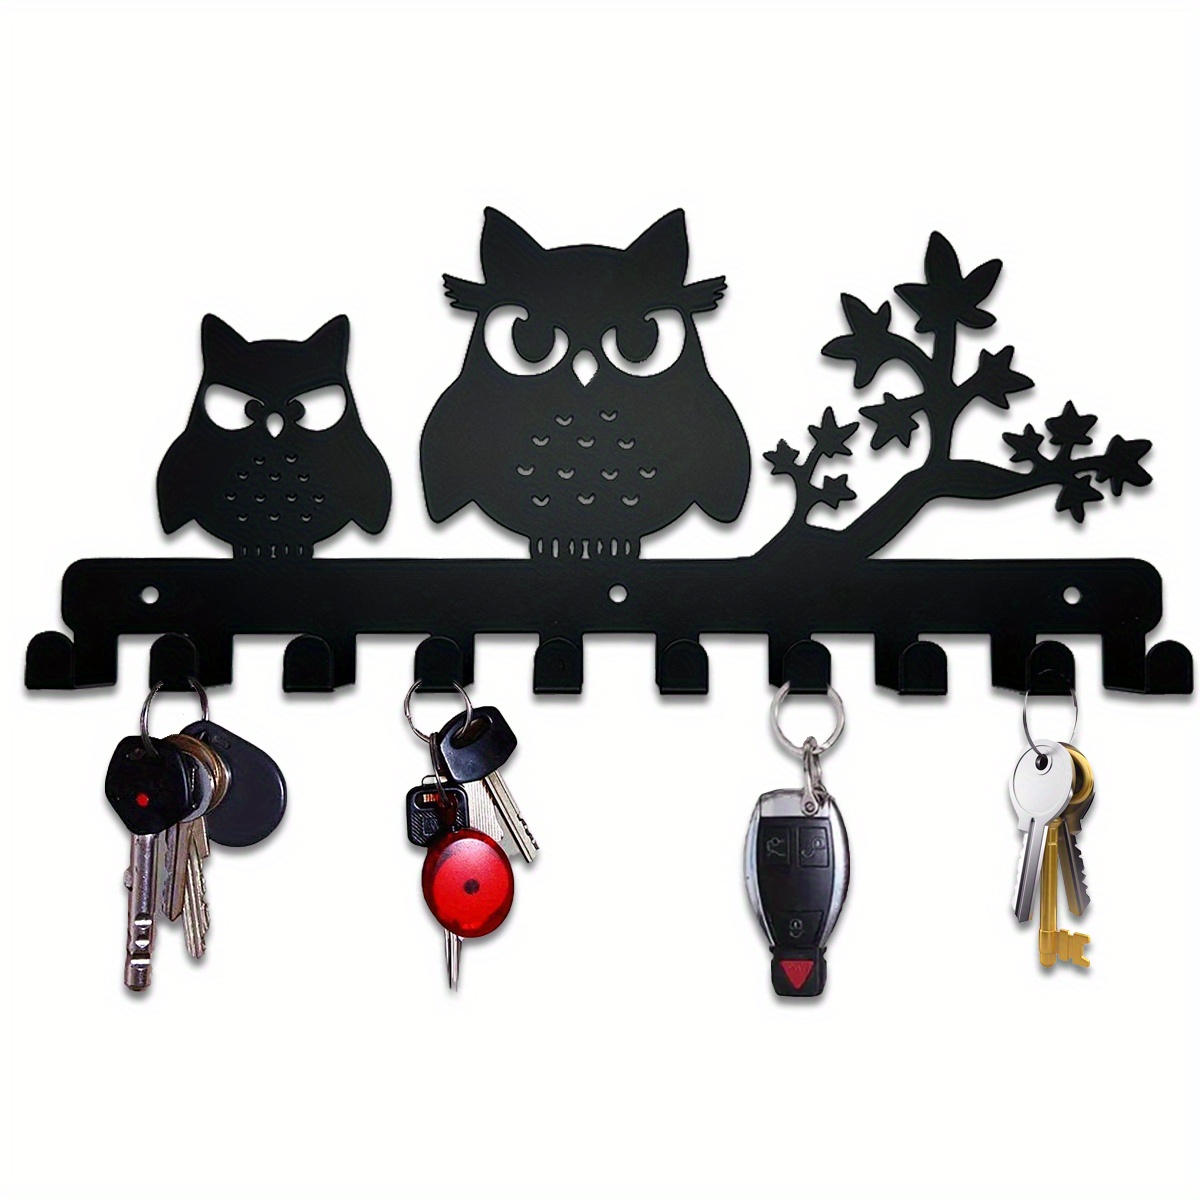 Decorative 3 Owls Key Hanger With 7 Hooks Wall Mounted Metal